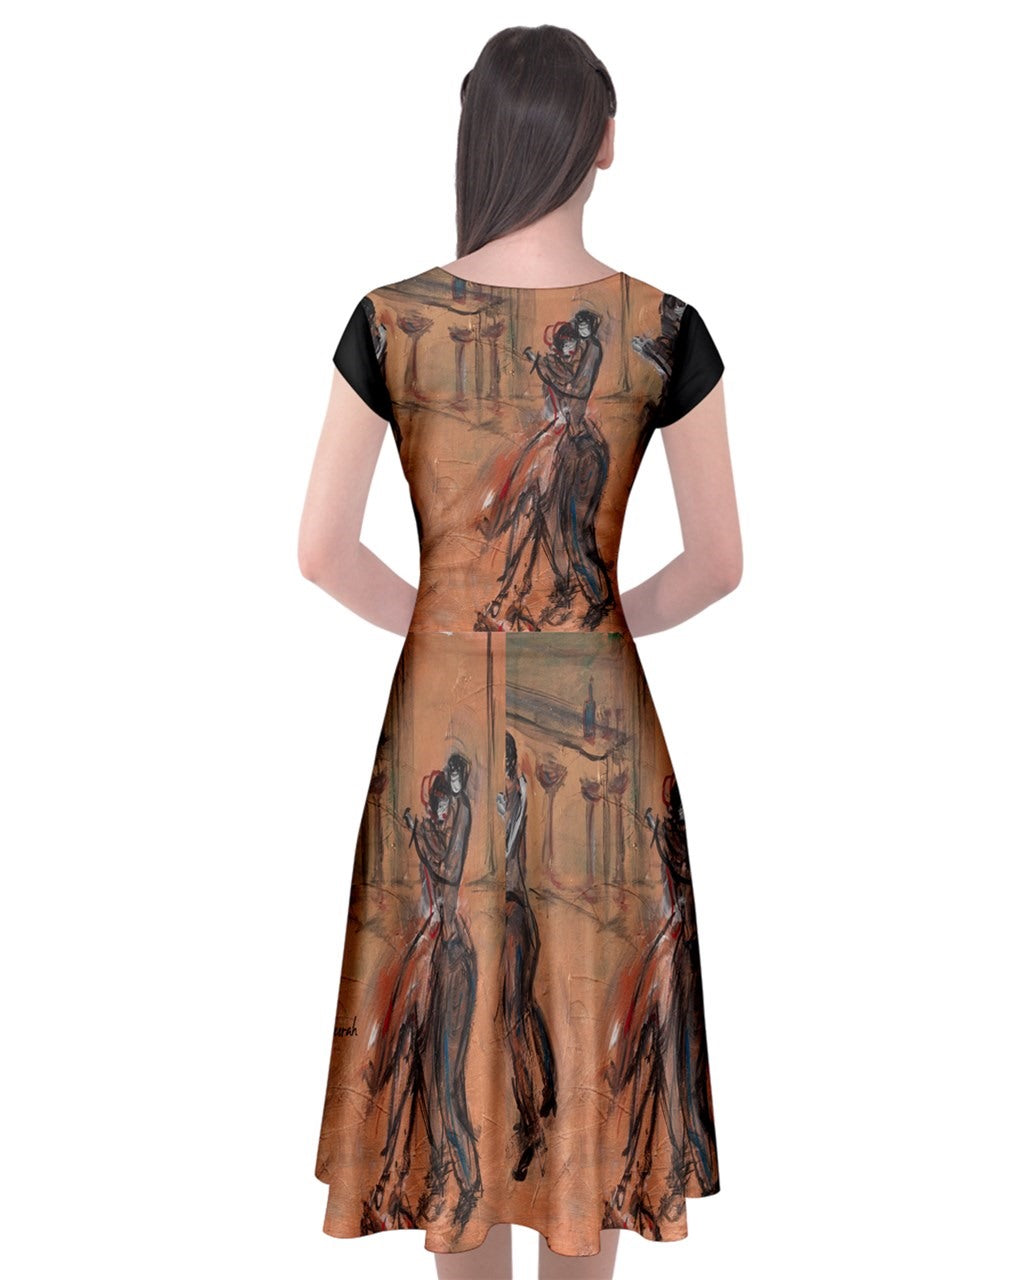  A dress with a vibrant, original art print by Leeorah, designed to flatter all sizes. The dress features a relaxed silhouette and soft fabric, promising comfort and style for any occasion. Back view